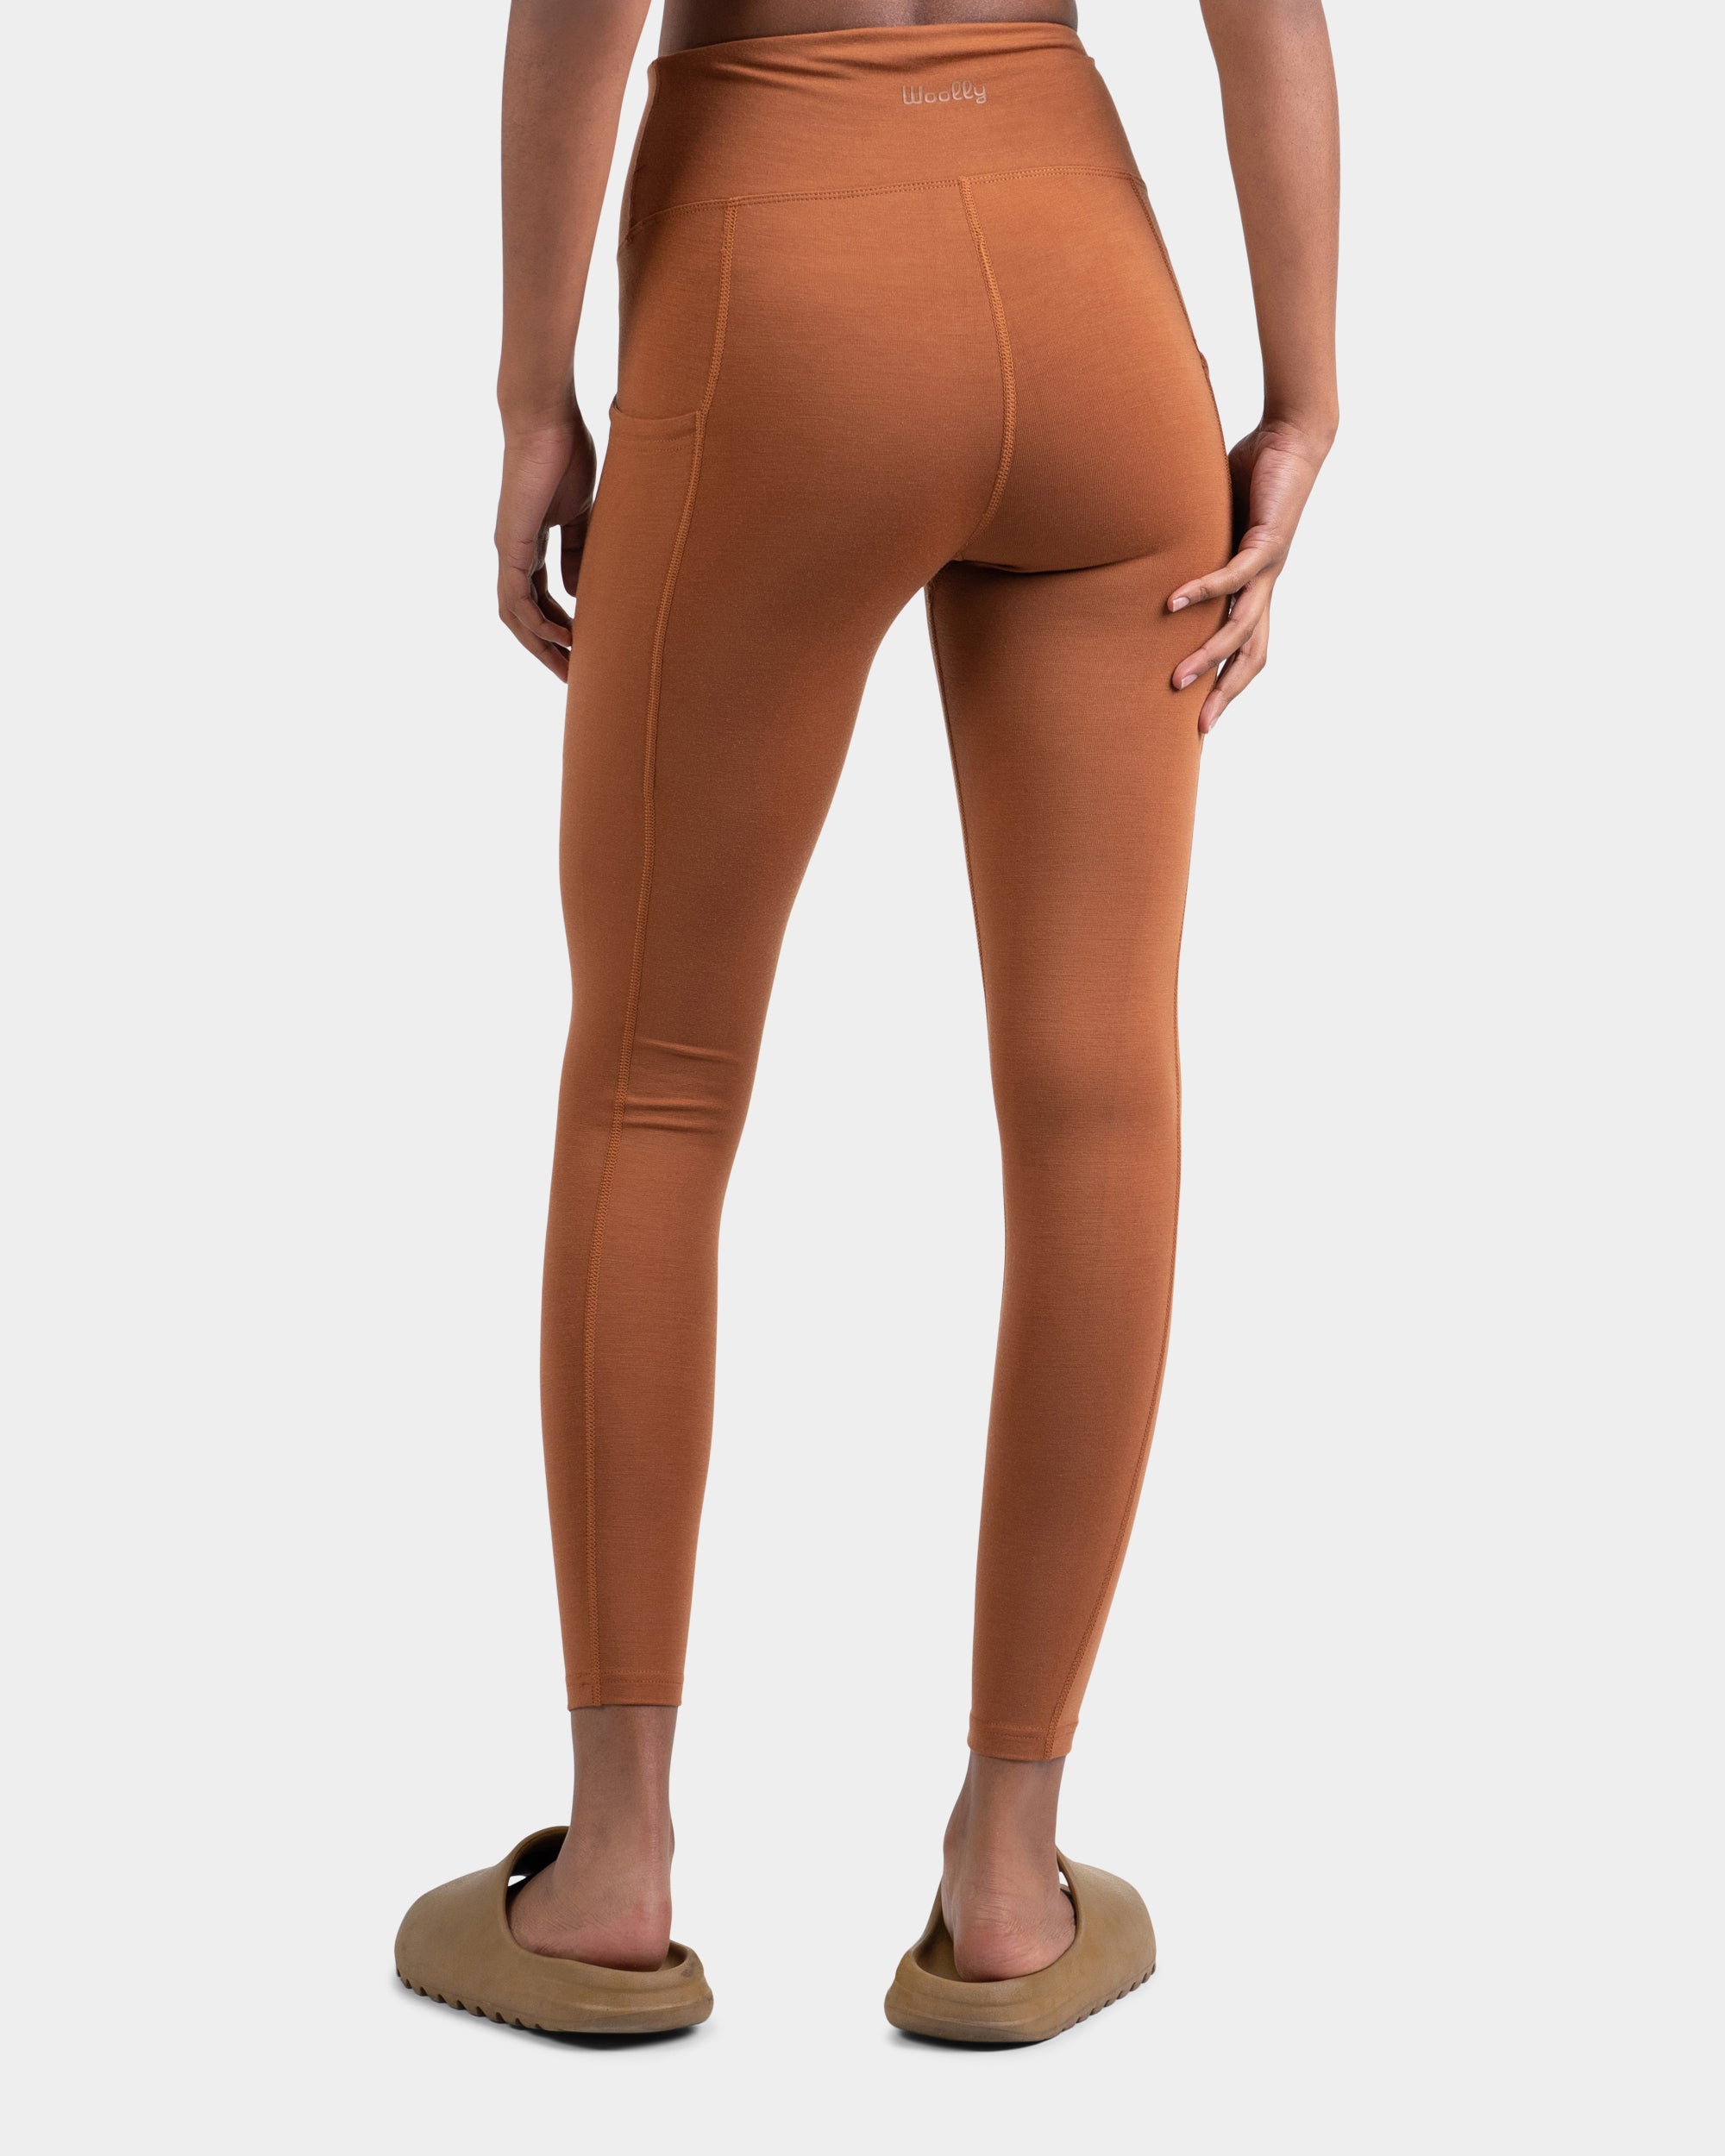 Womens Brown Leggings, Everyday Low Prices